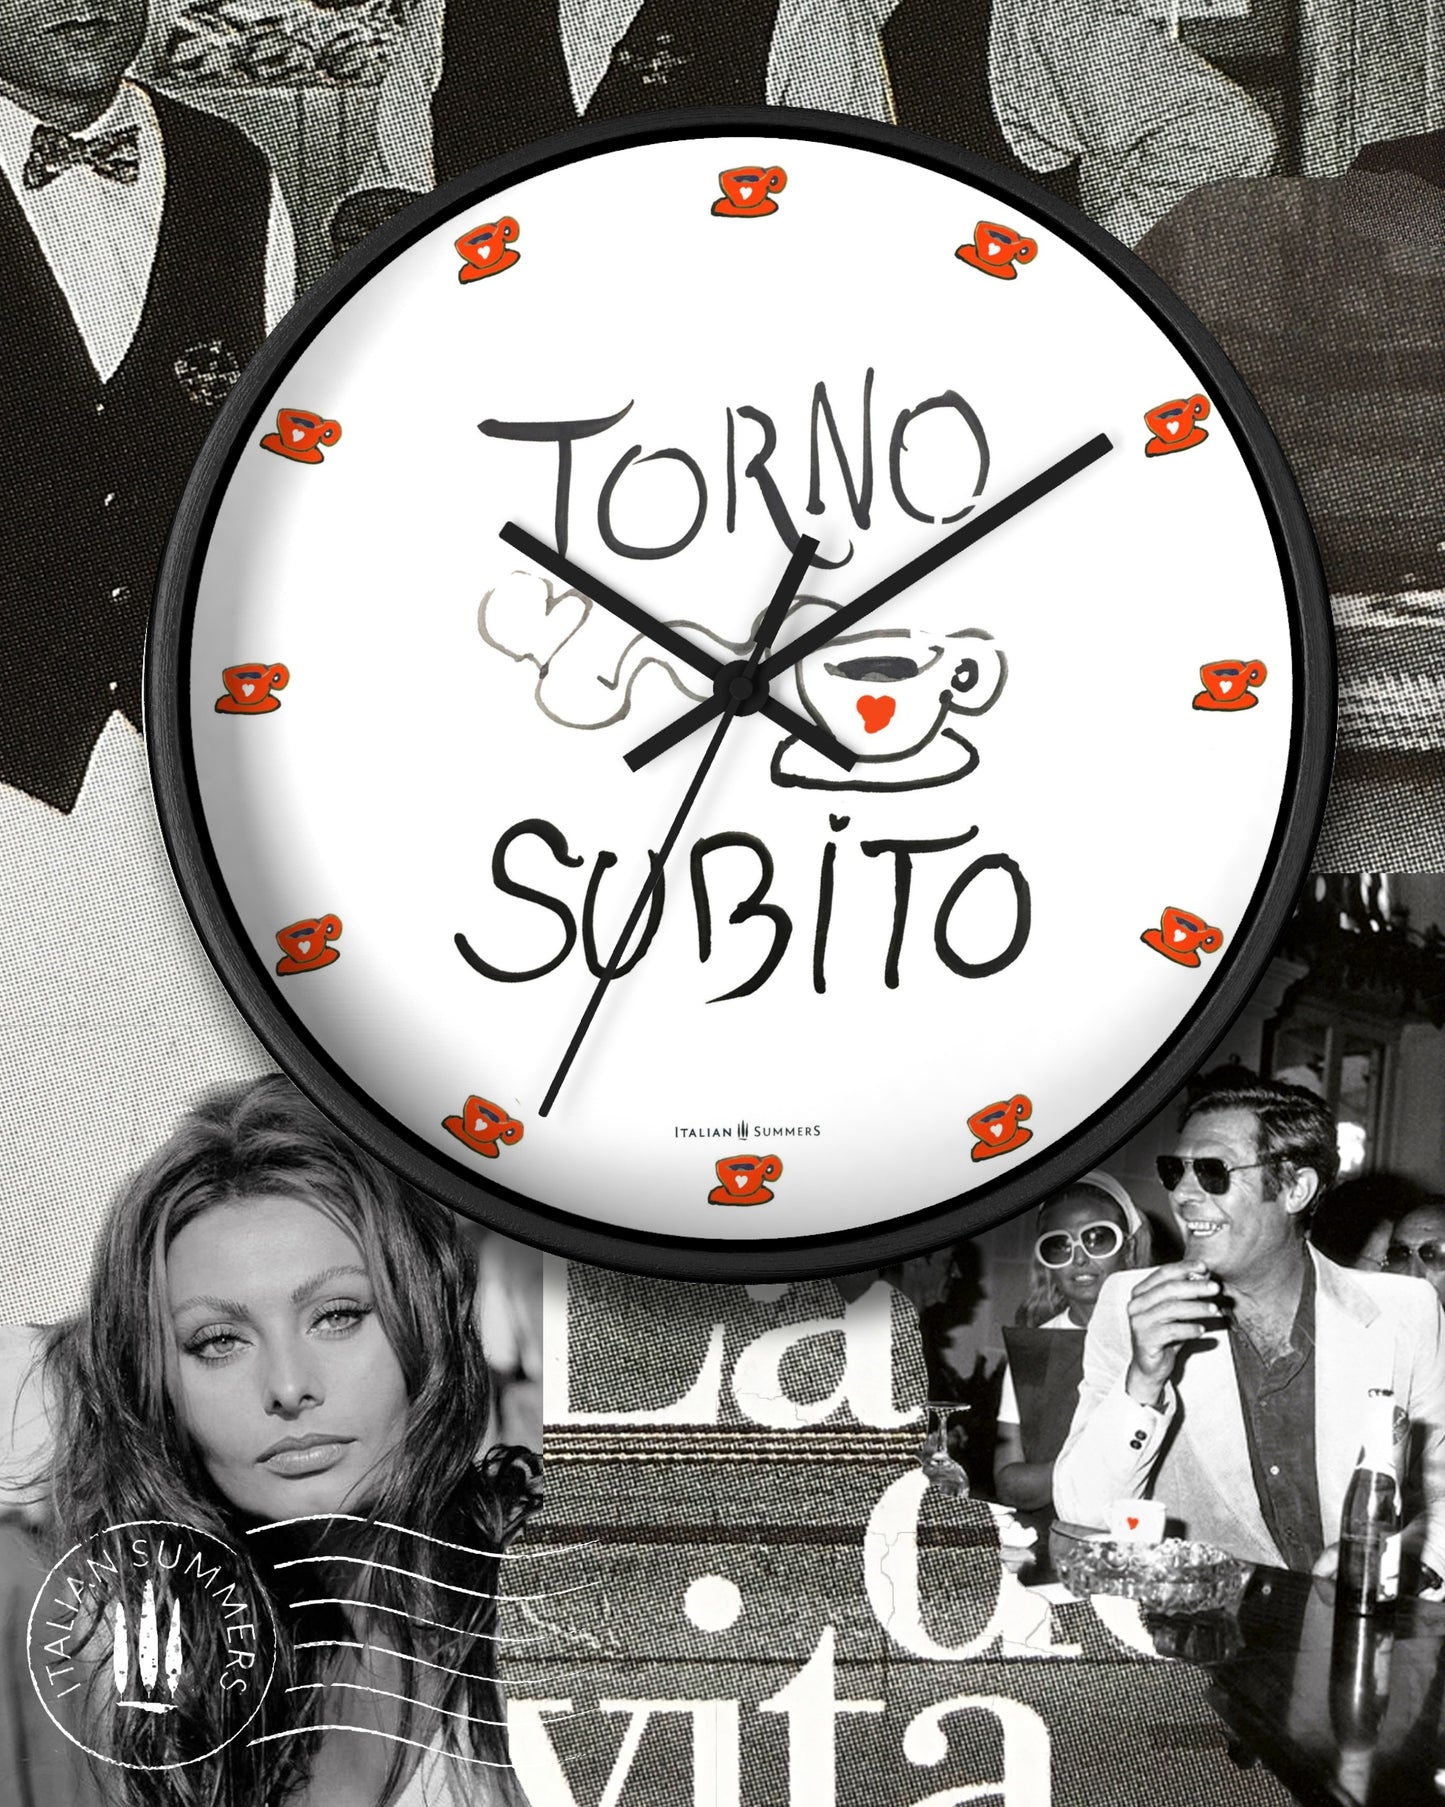 Italy inspired Wall Clock Torno Subito Inspired by the Italian notes left behind by shops on their espresso breaks. Designed and sold by Italian Summers